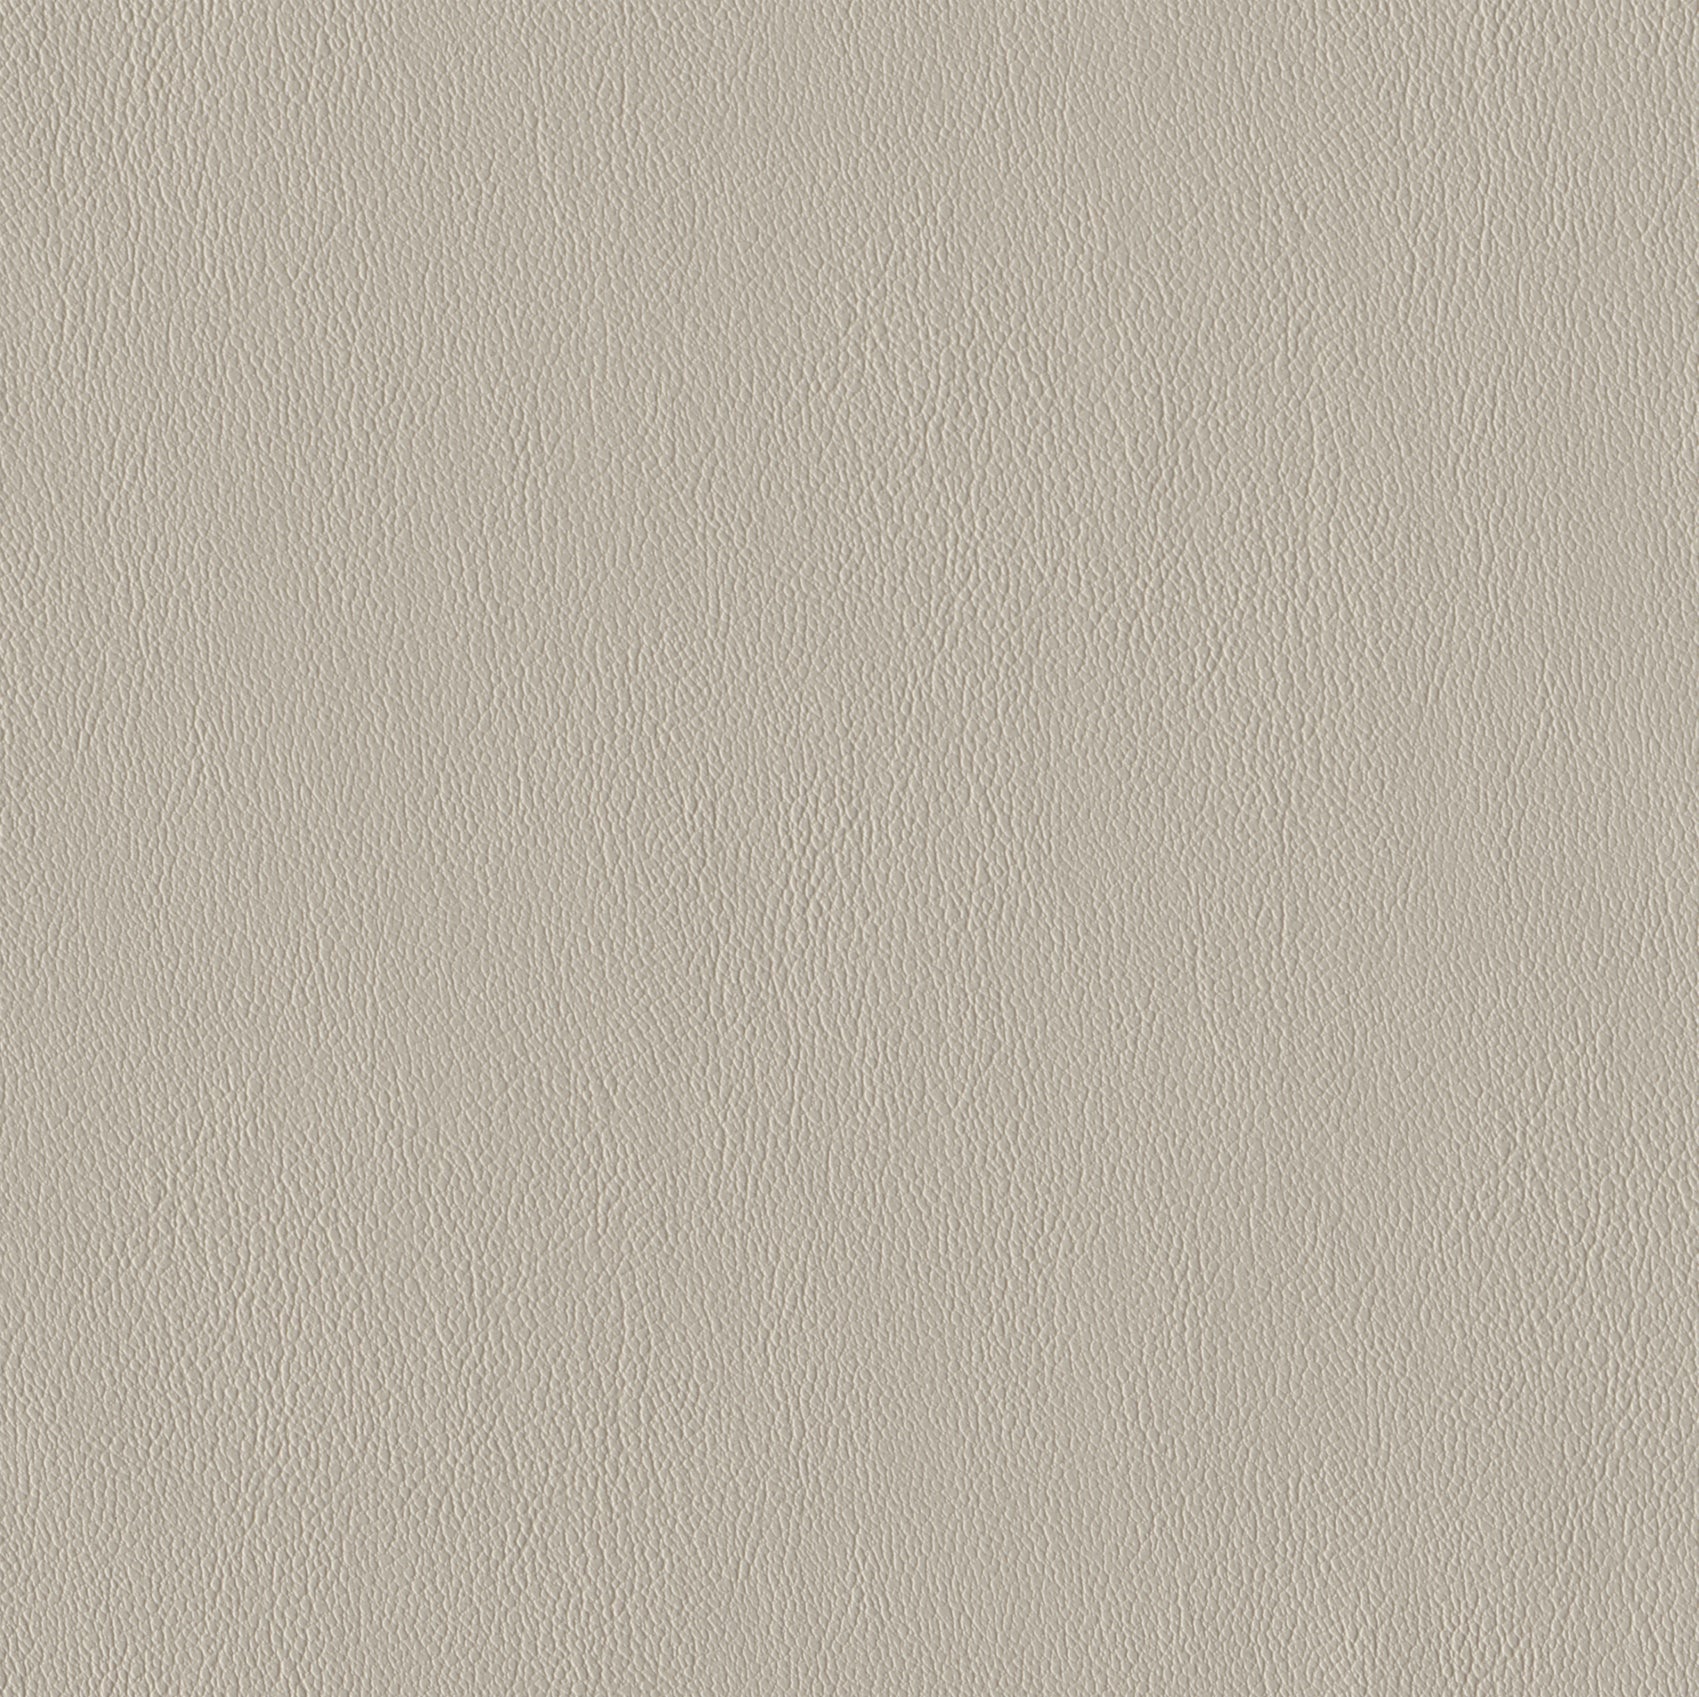 Andriali-Contract-Vinyl_Upholstery-Design-WesternFR5-Color-007Bone-Width-140cm-